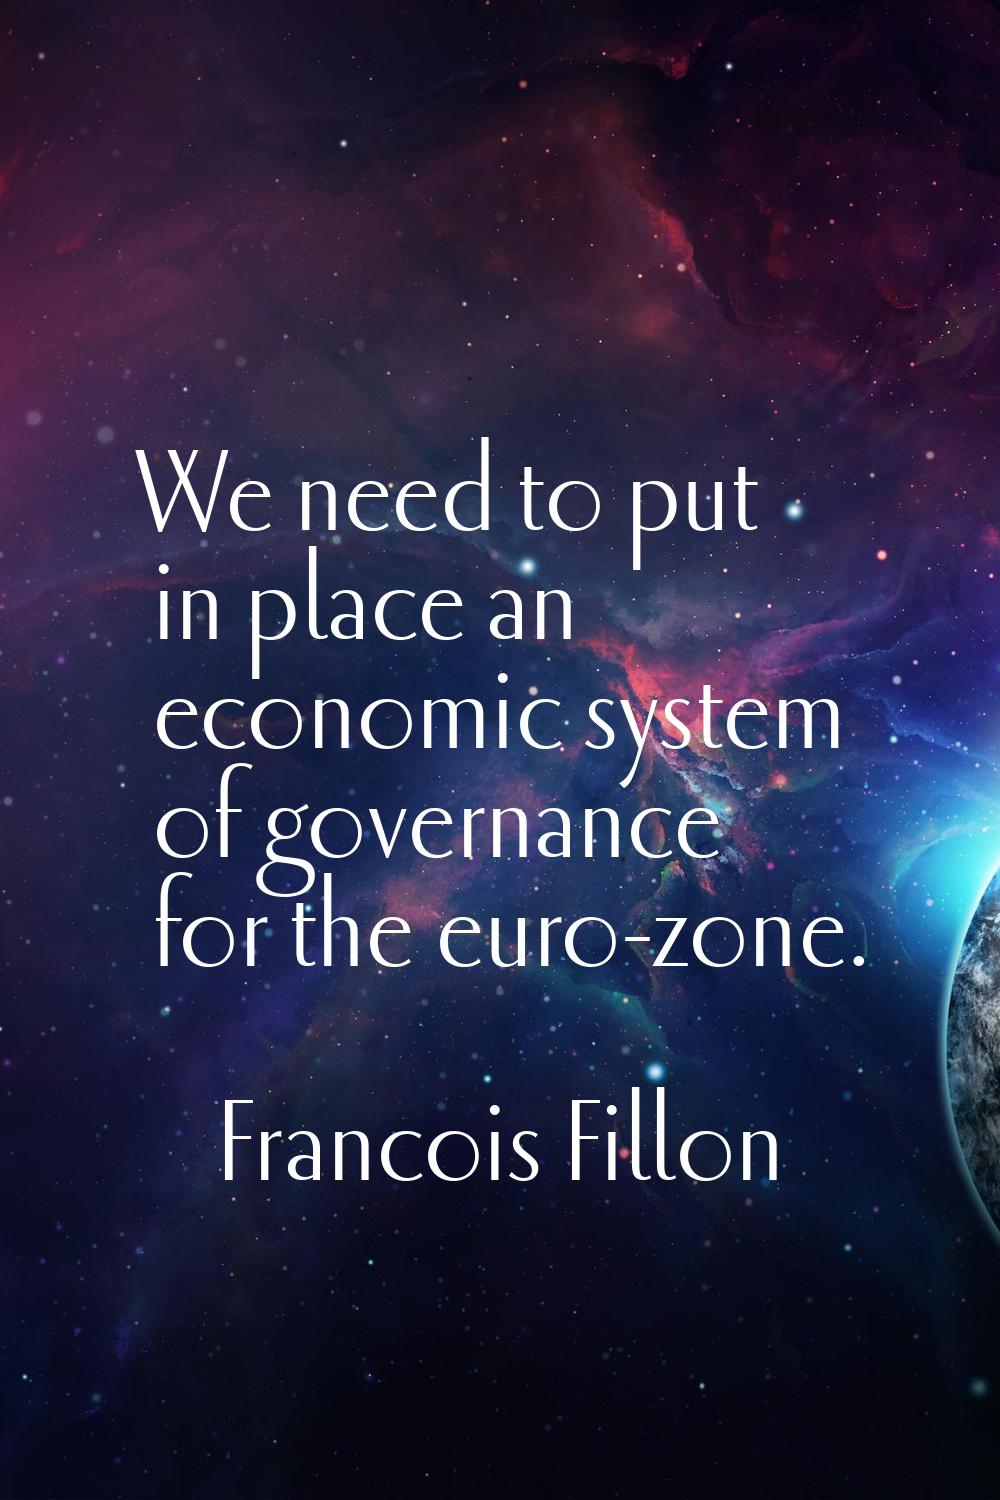 We need to put in place an economic system of governance for the euro-zone.